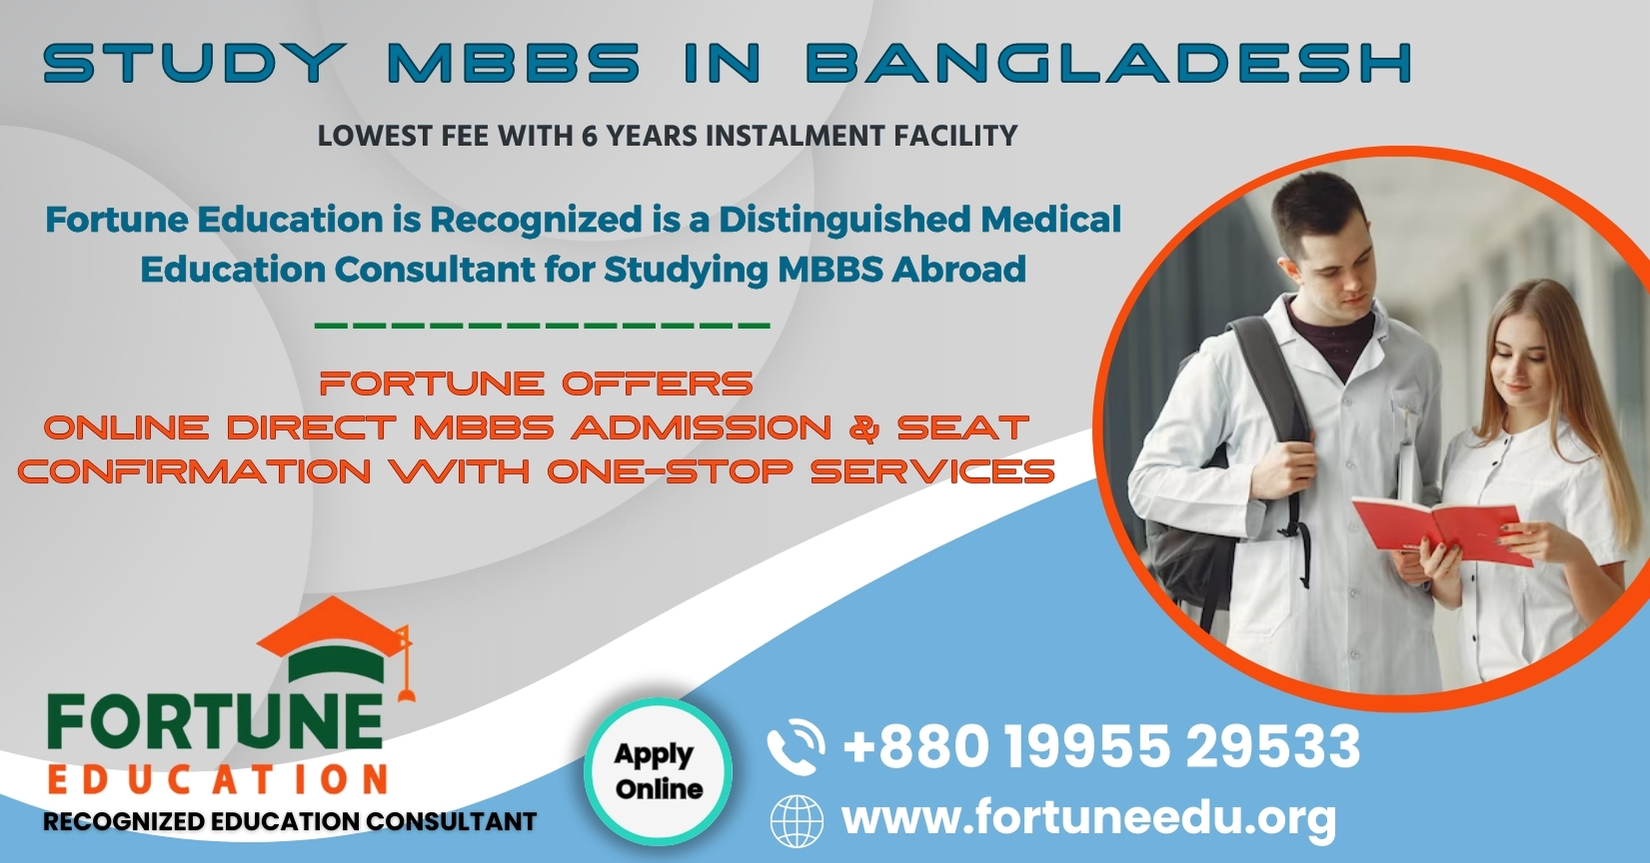 Best Medical Colleges for Study MBBS in Bangladesh